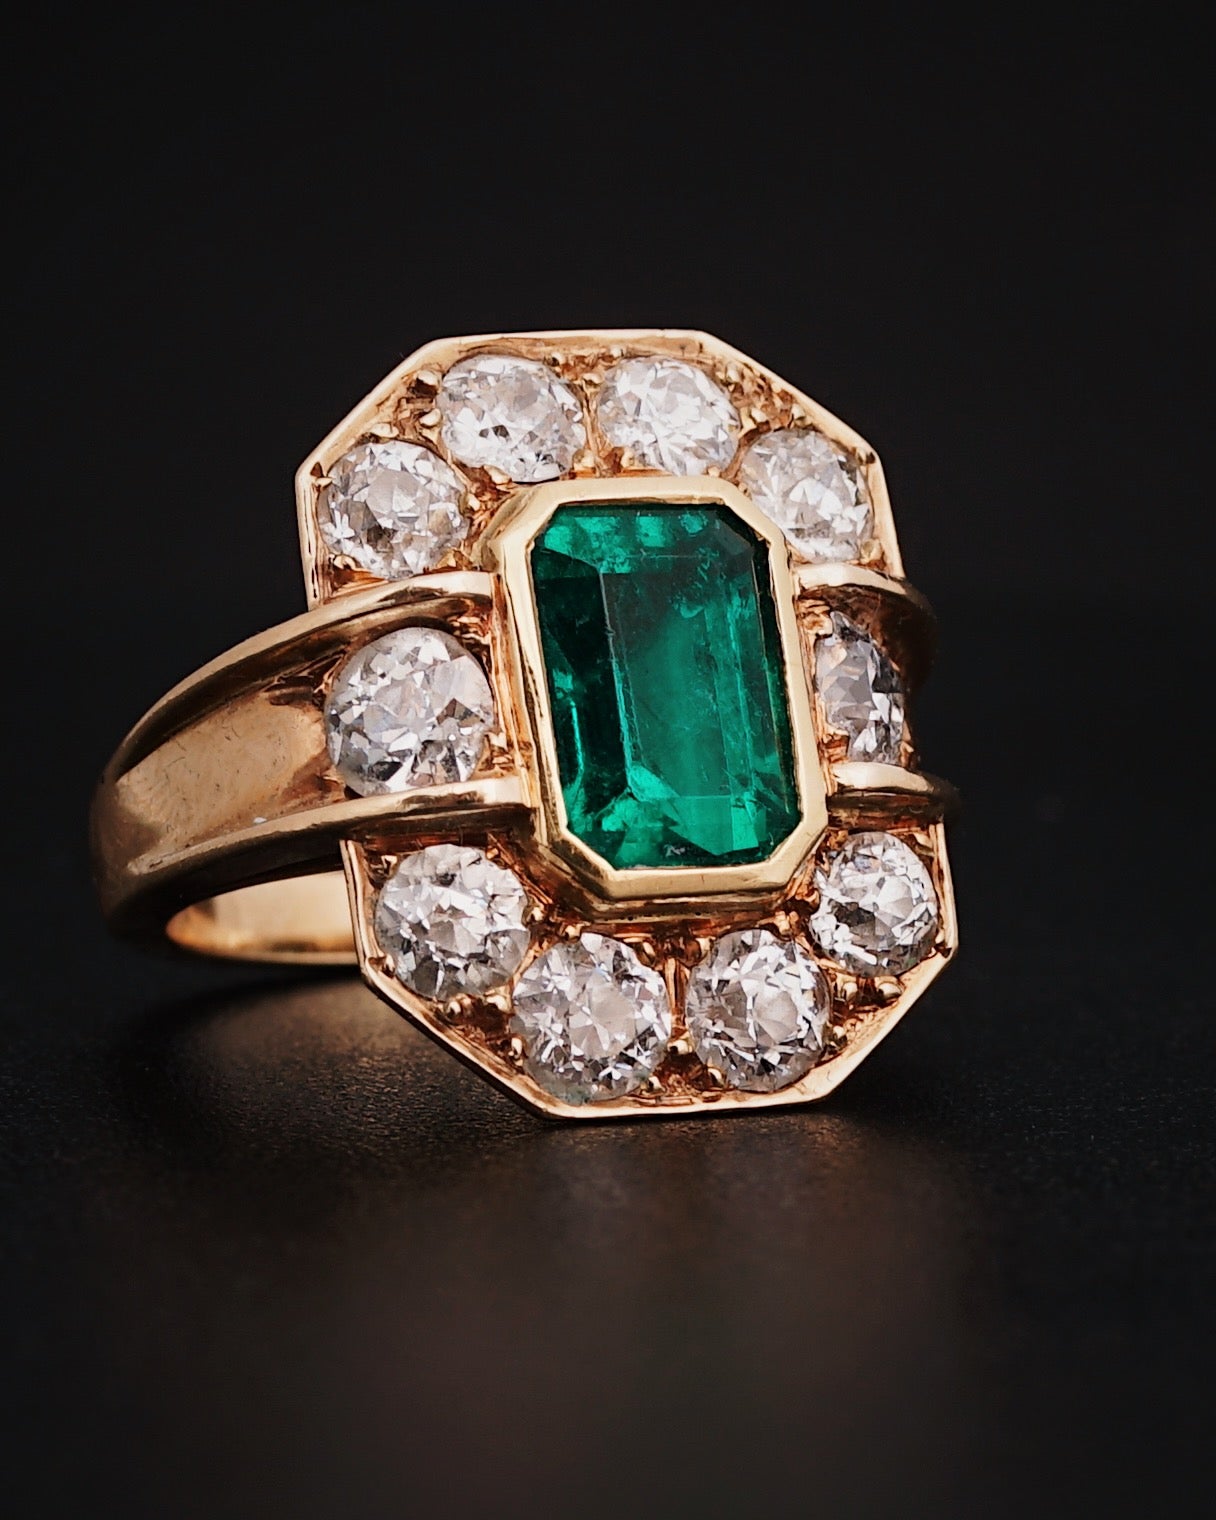 Mellerio dits Meller, Paris
A stunning 2.50cts Colombian Emerald & Old Mine Diamond set on 18k Gold Ring, Circa 1940.
Not less than this strong 18k gold Mellerio setting and 2.15 carats of Old Mine diamonds were necessary to enhance this 2.50 carats